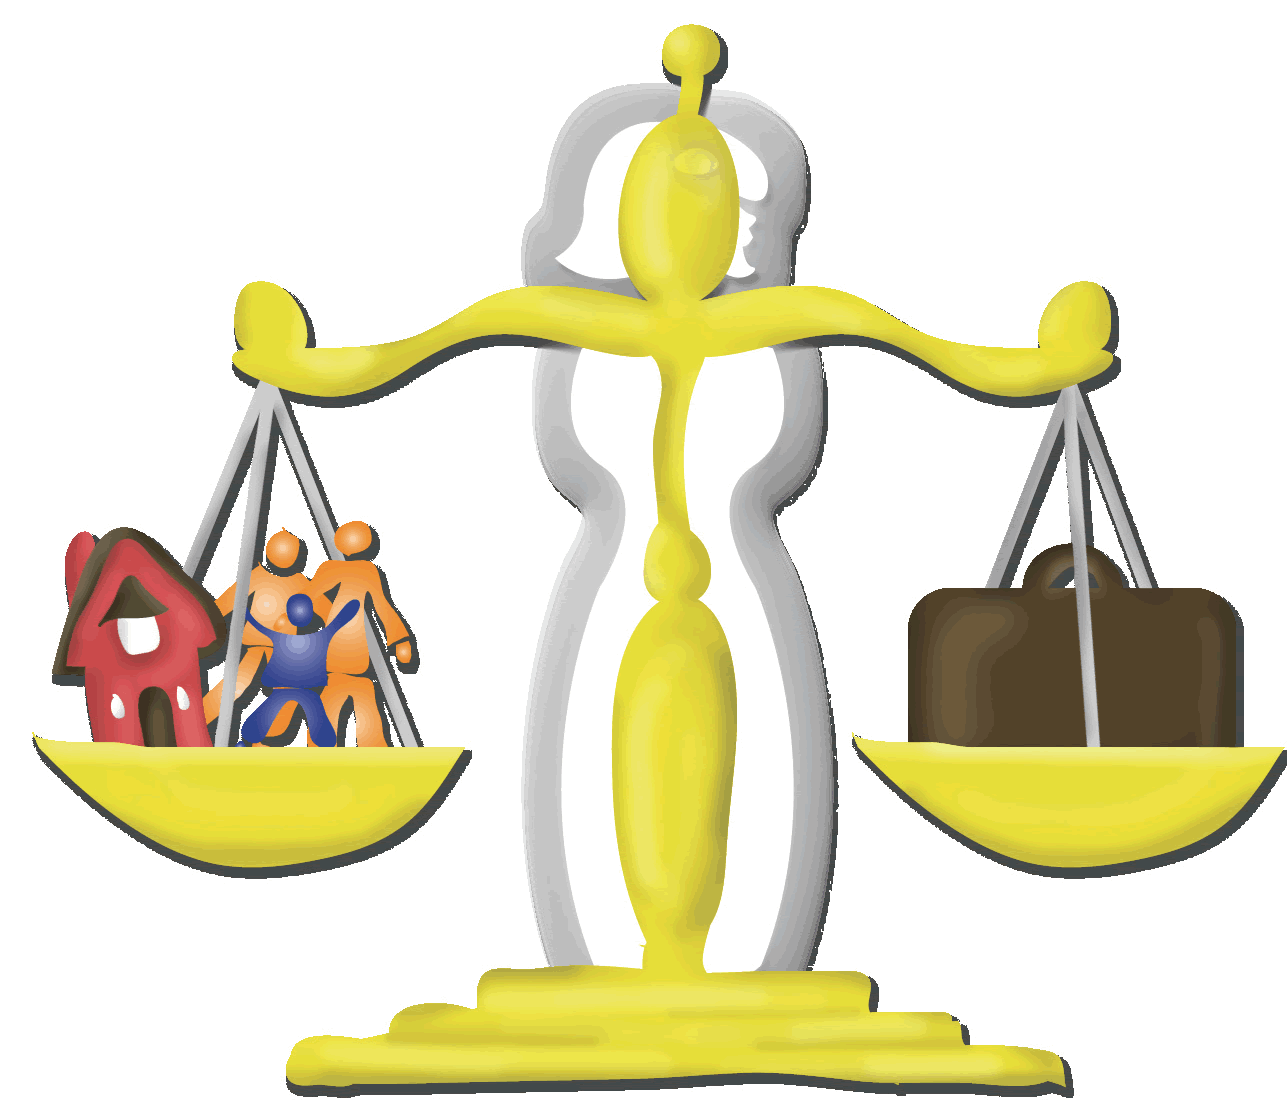 Legal terminology image of. Law clipart family law